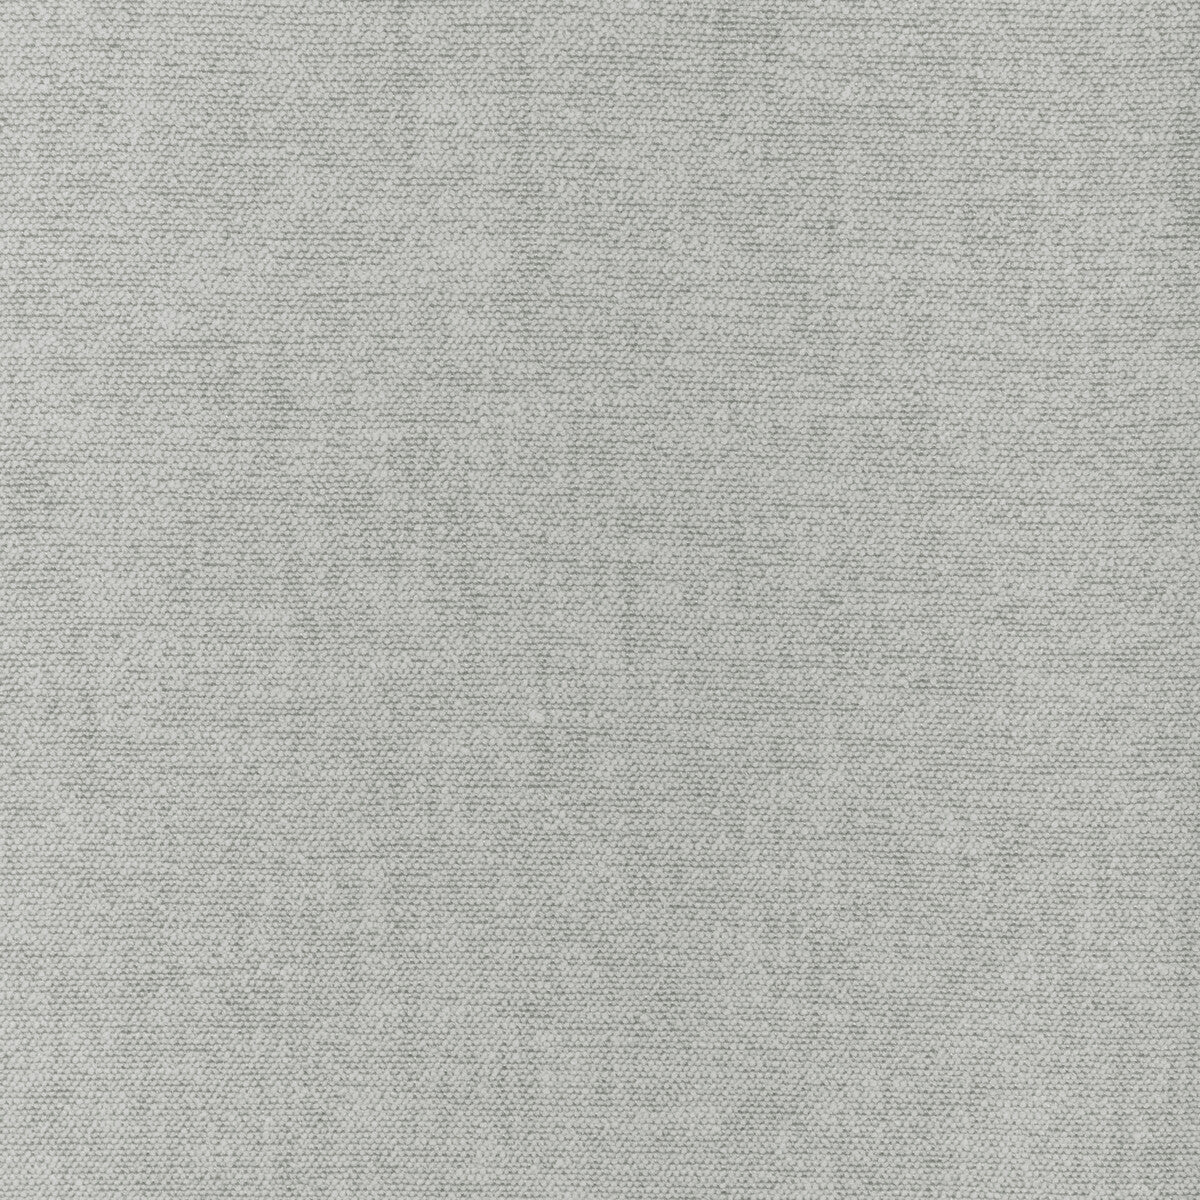 Farmcoast fabric in pewter color - pattern 36858.11.0 - by Kravet Couture in the Atelier Weaves collection